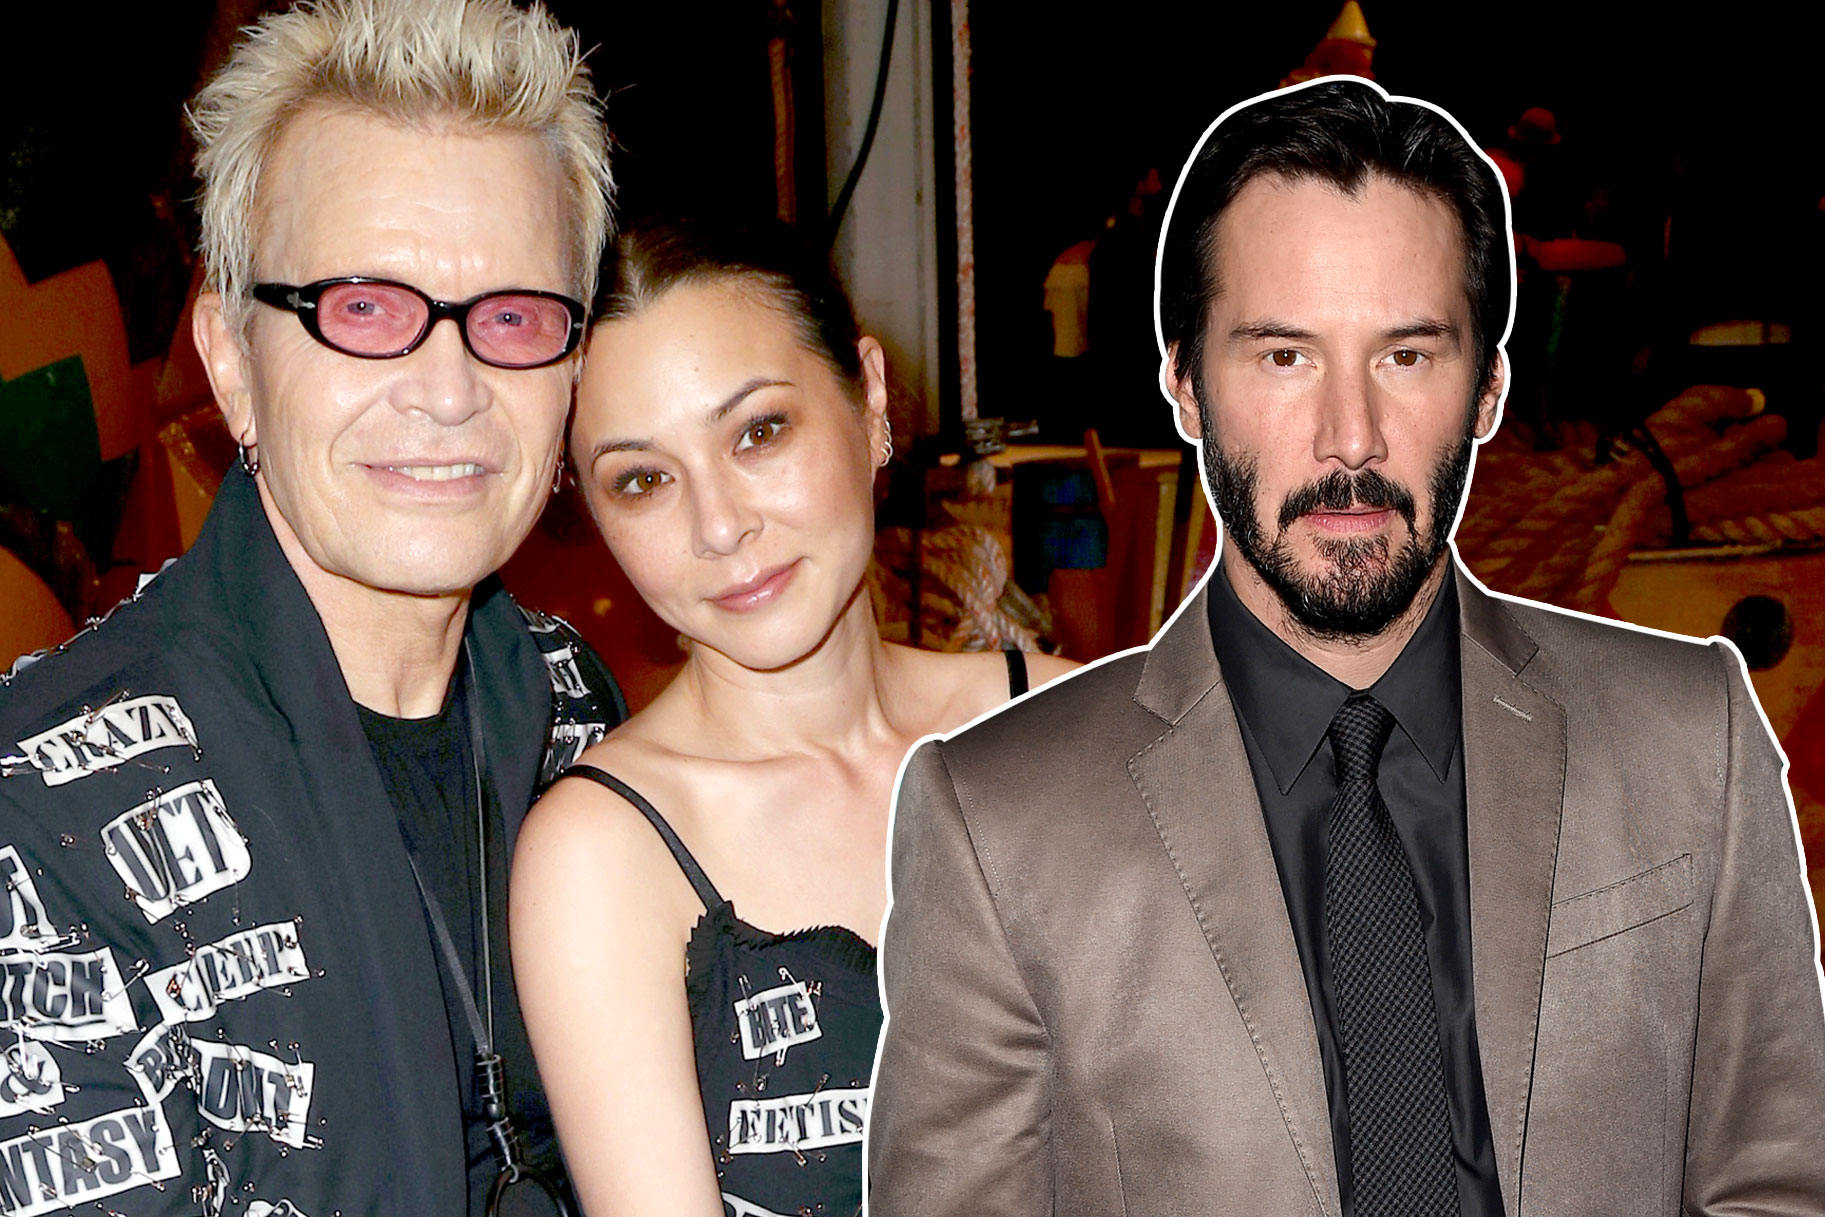 Keanu flirts with his ex China Chow in front of her boyfriend Billy Idol